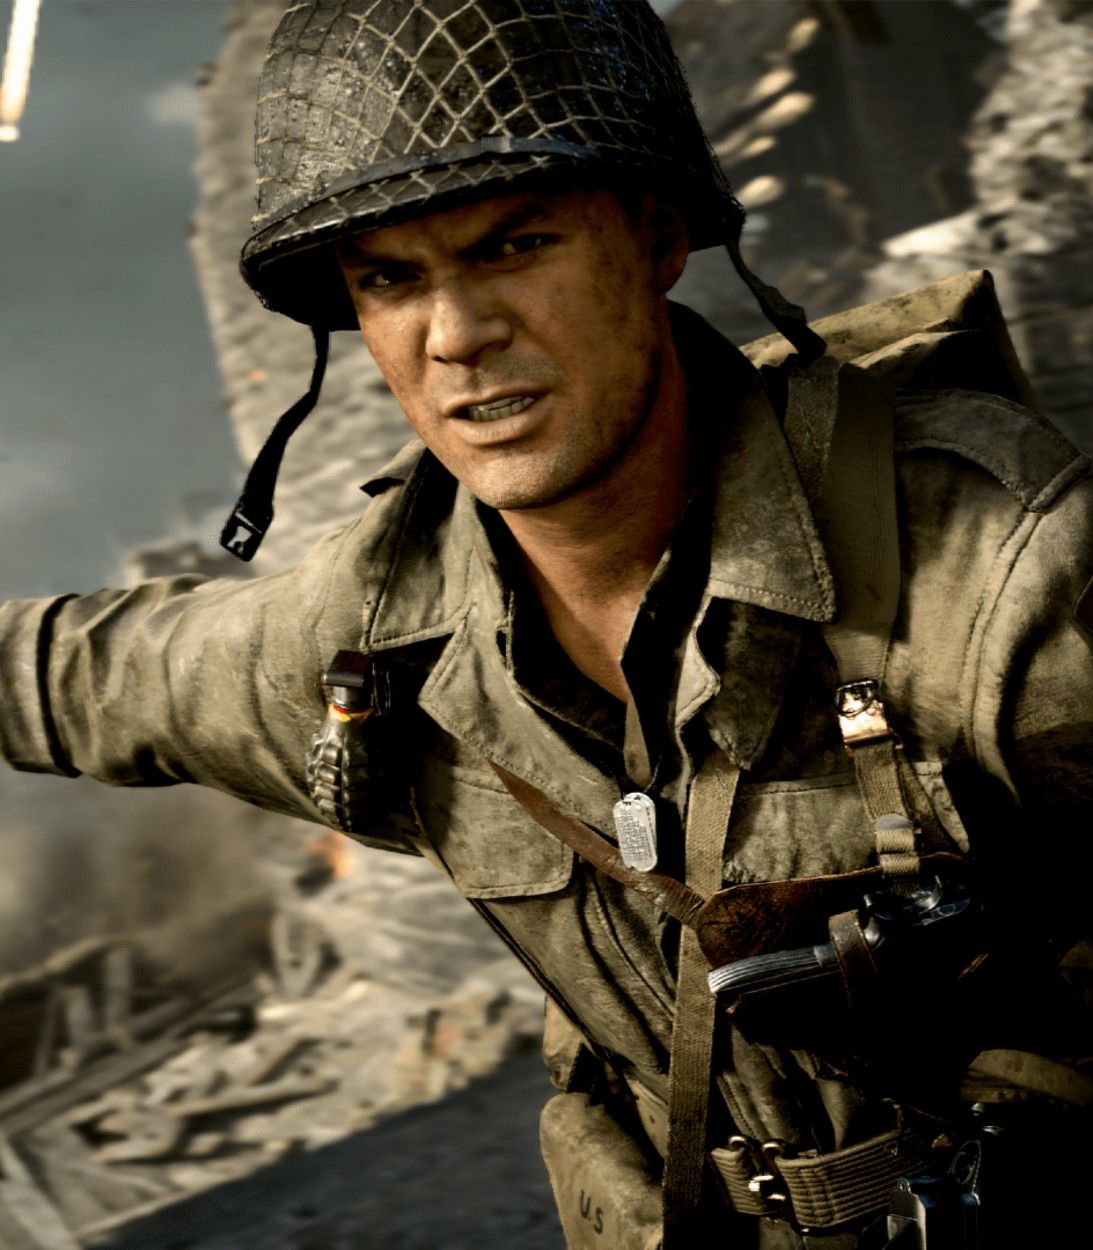 Call of Duty: WWII - Sgt. Pierson giving orders